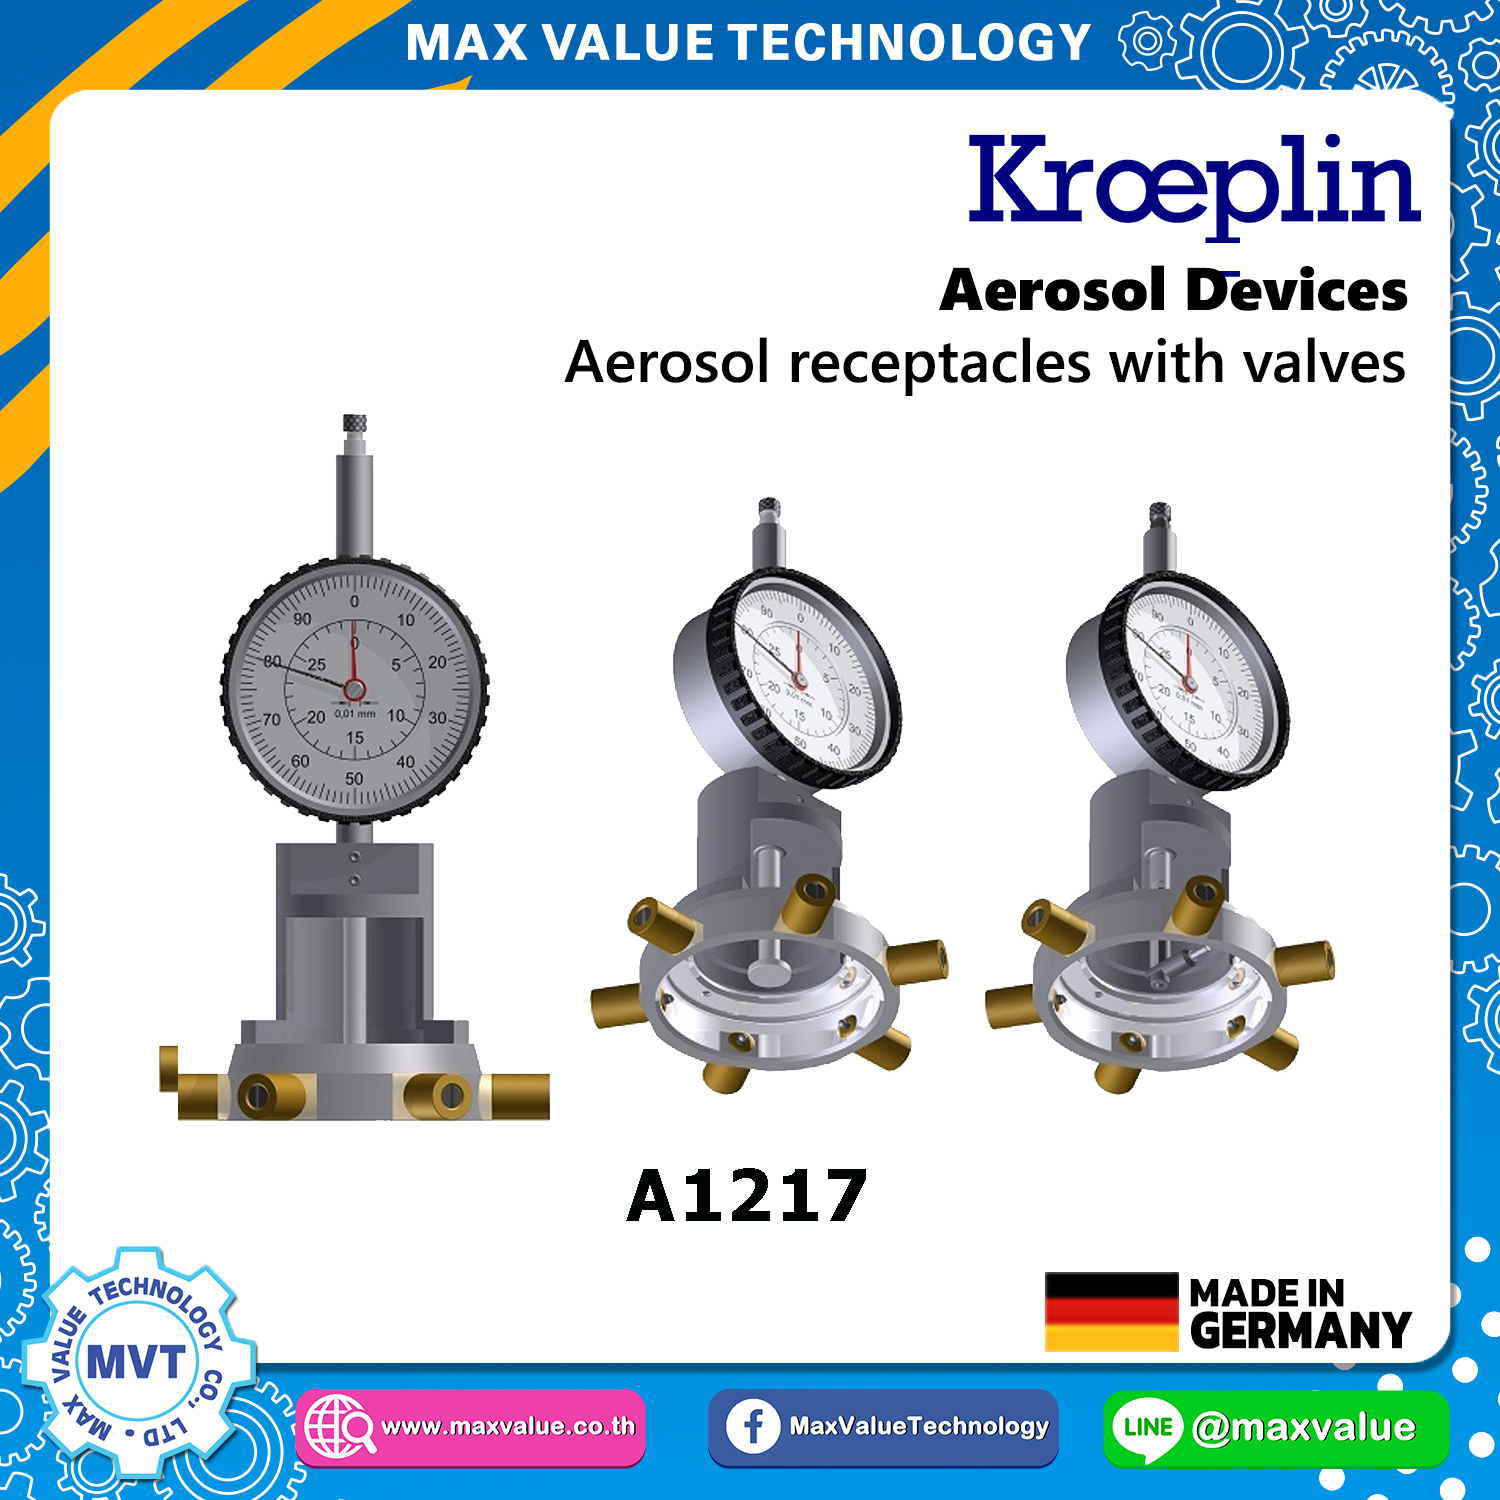 A1217/AE1217 - Aerosol devices - Aerosol receptacles with valves